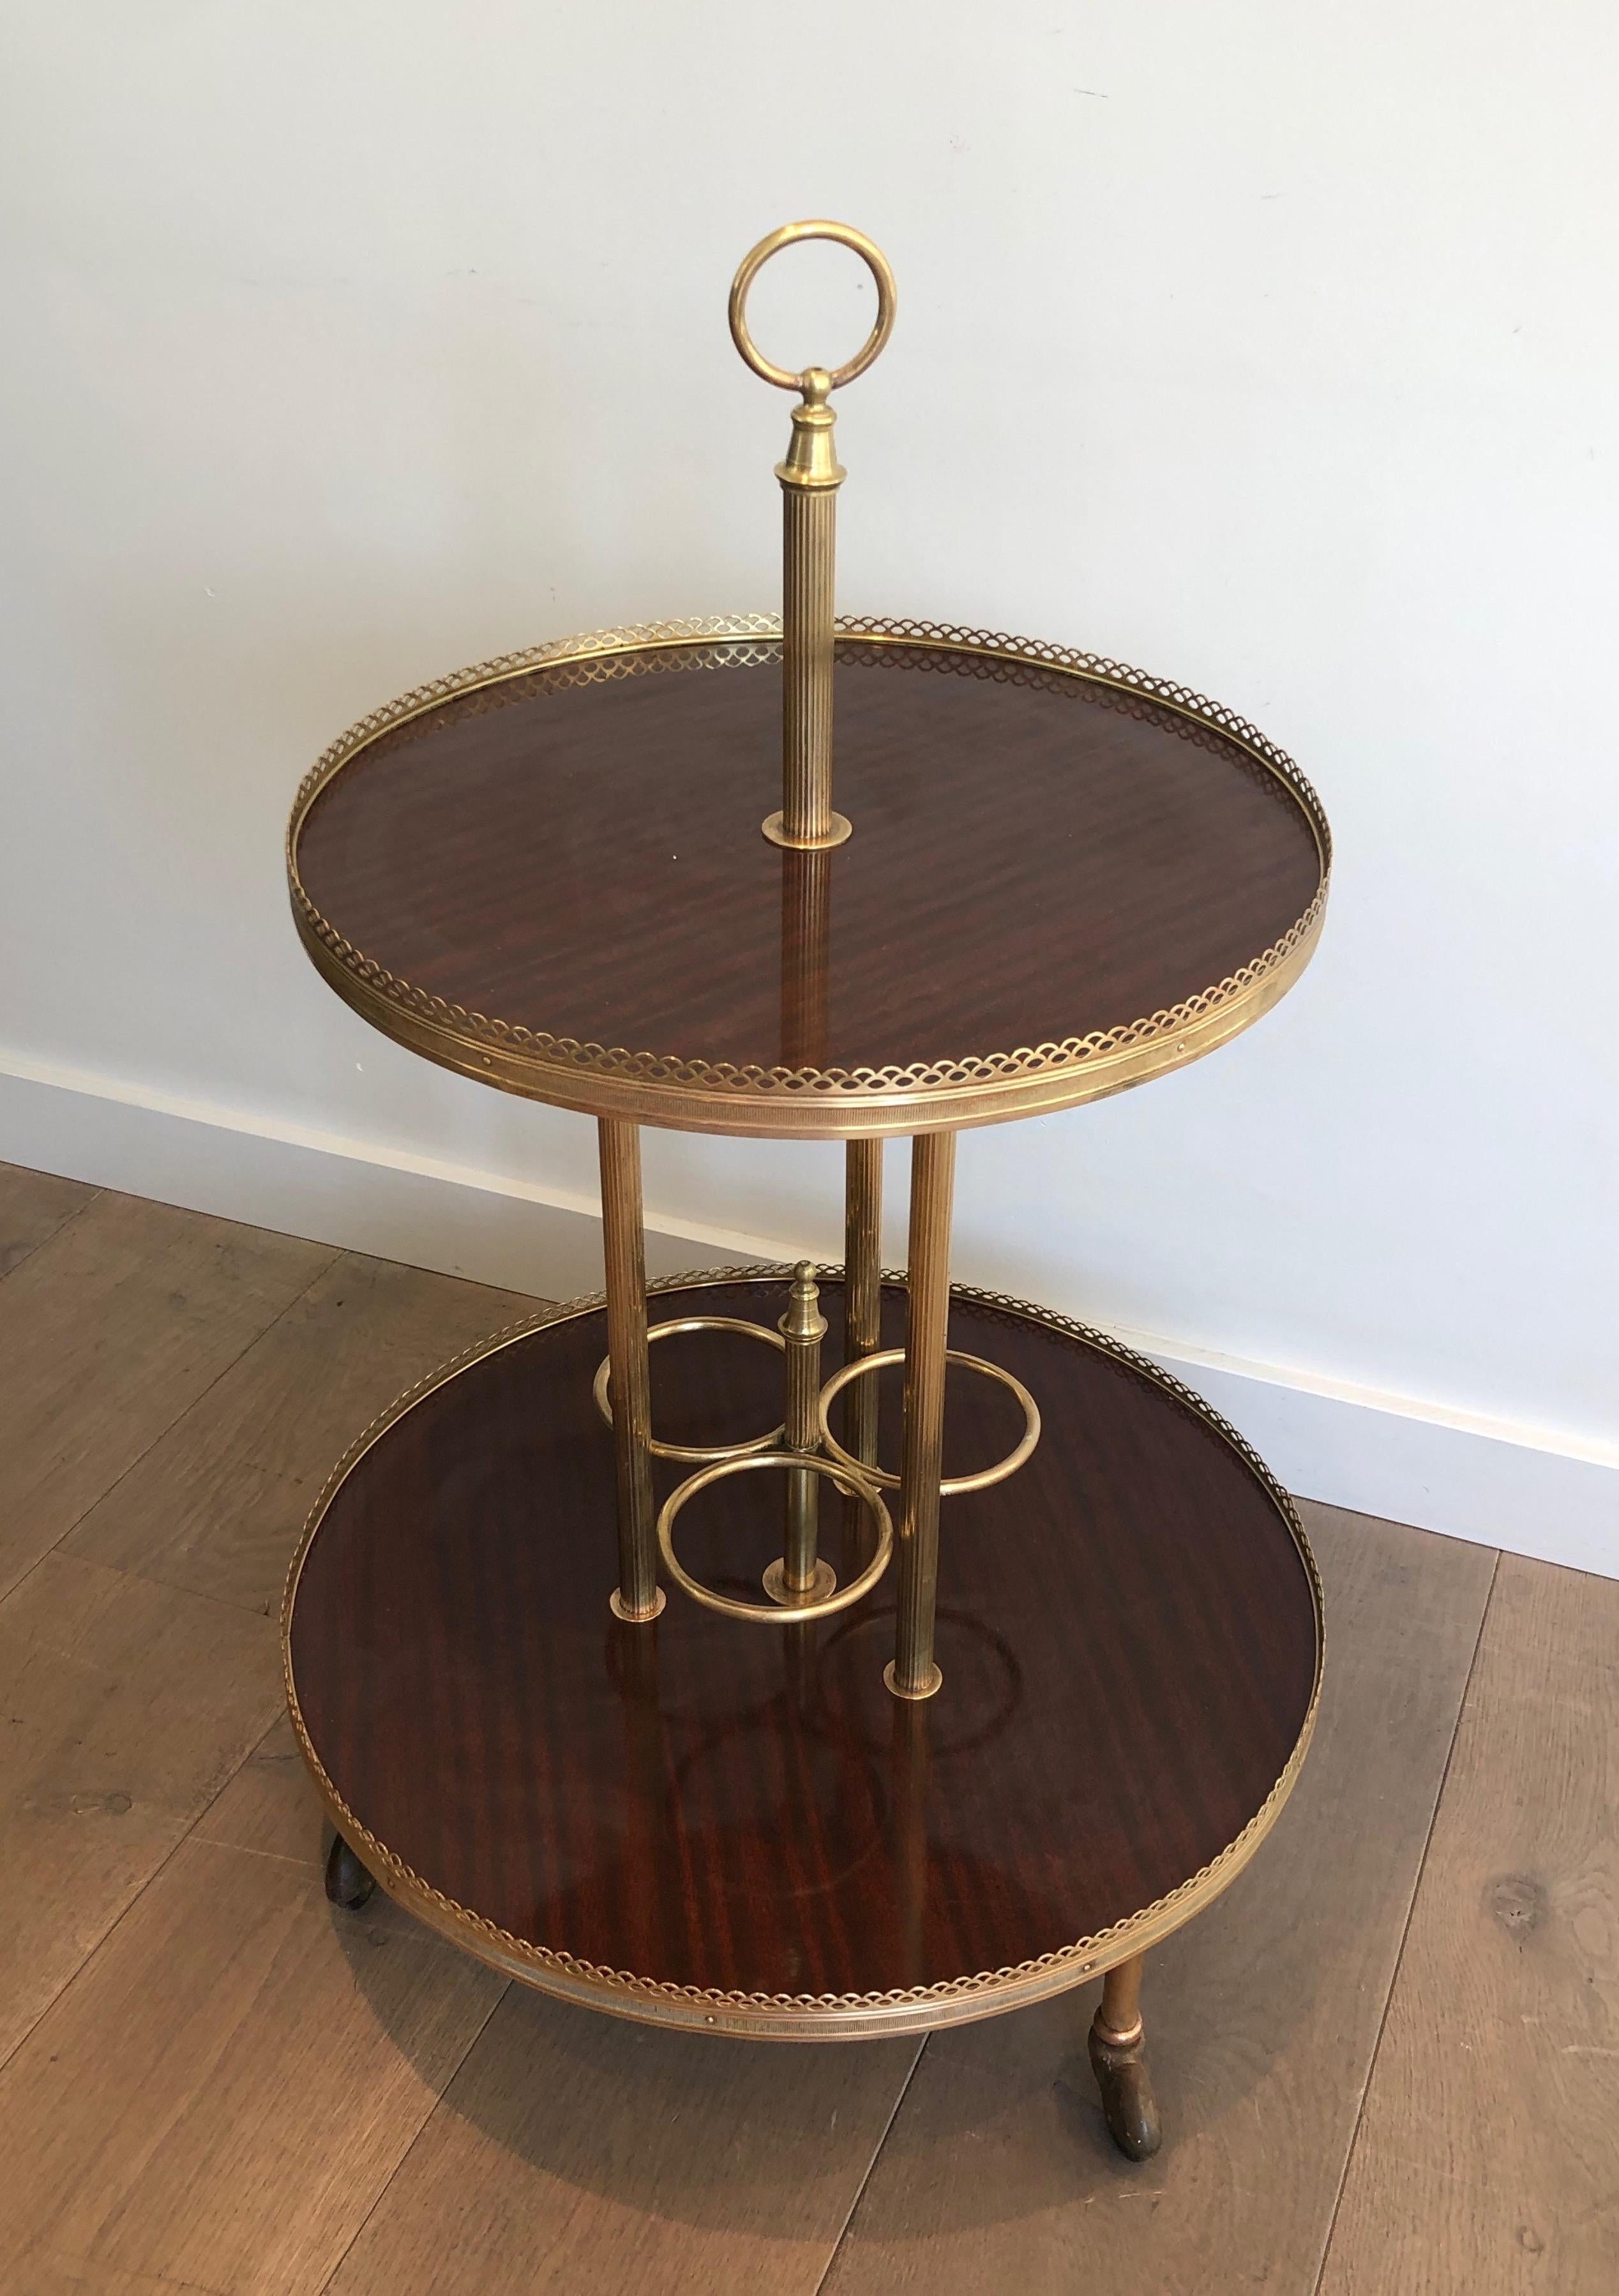 This unusual round drinks trolley is made of mahogany and brass. This is a French work attributed to Maison Jansen. Circa 1940